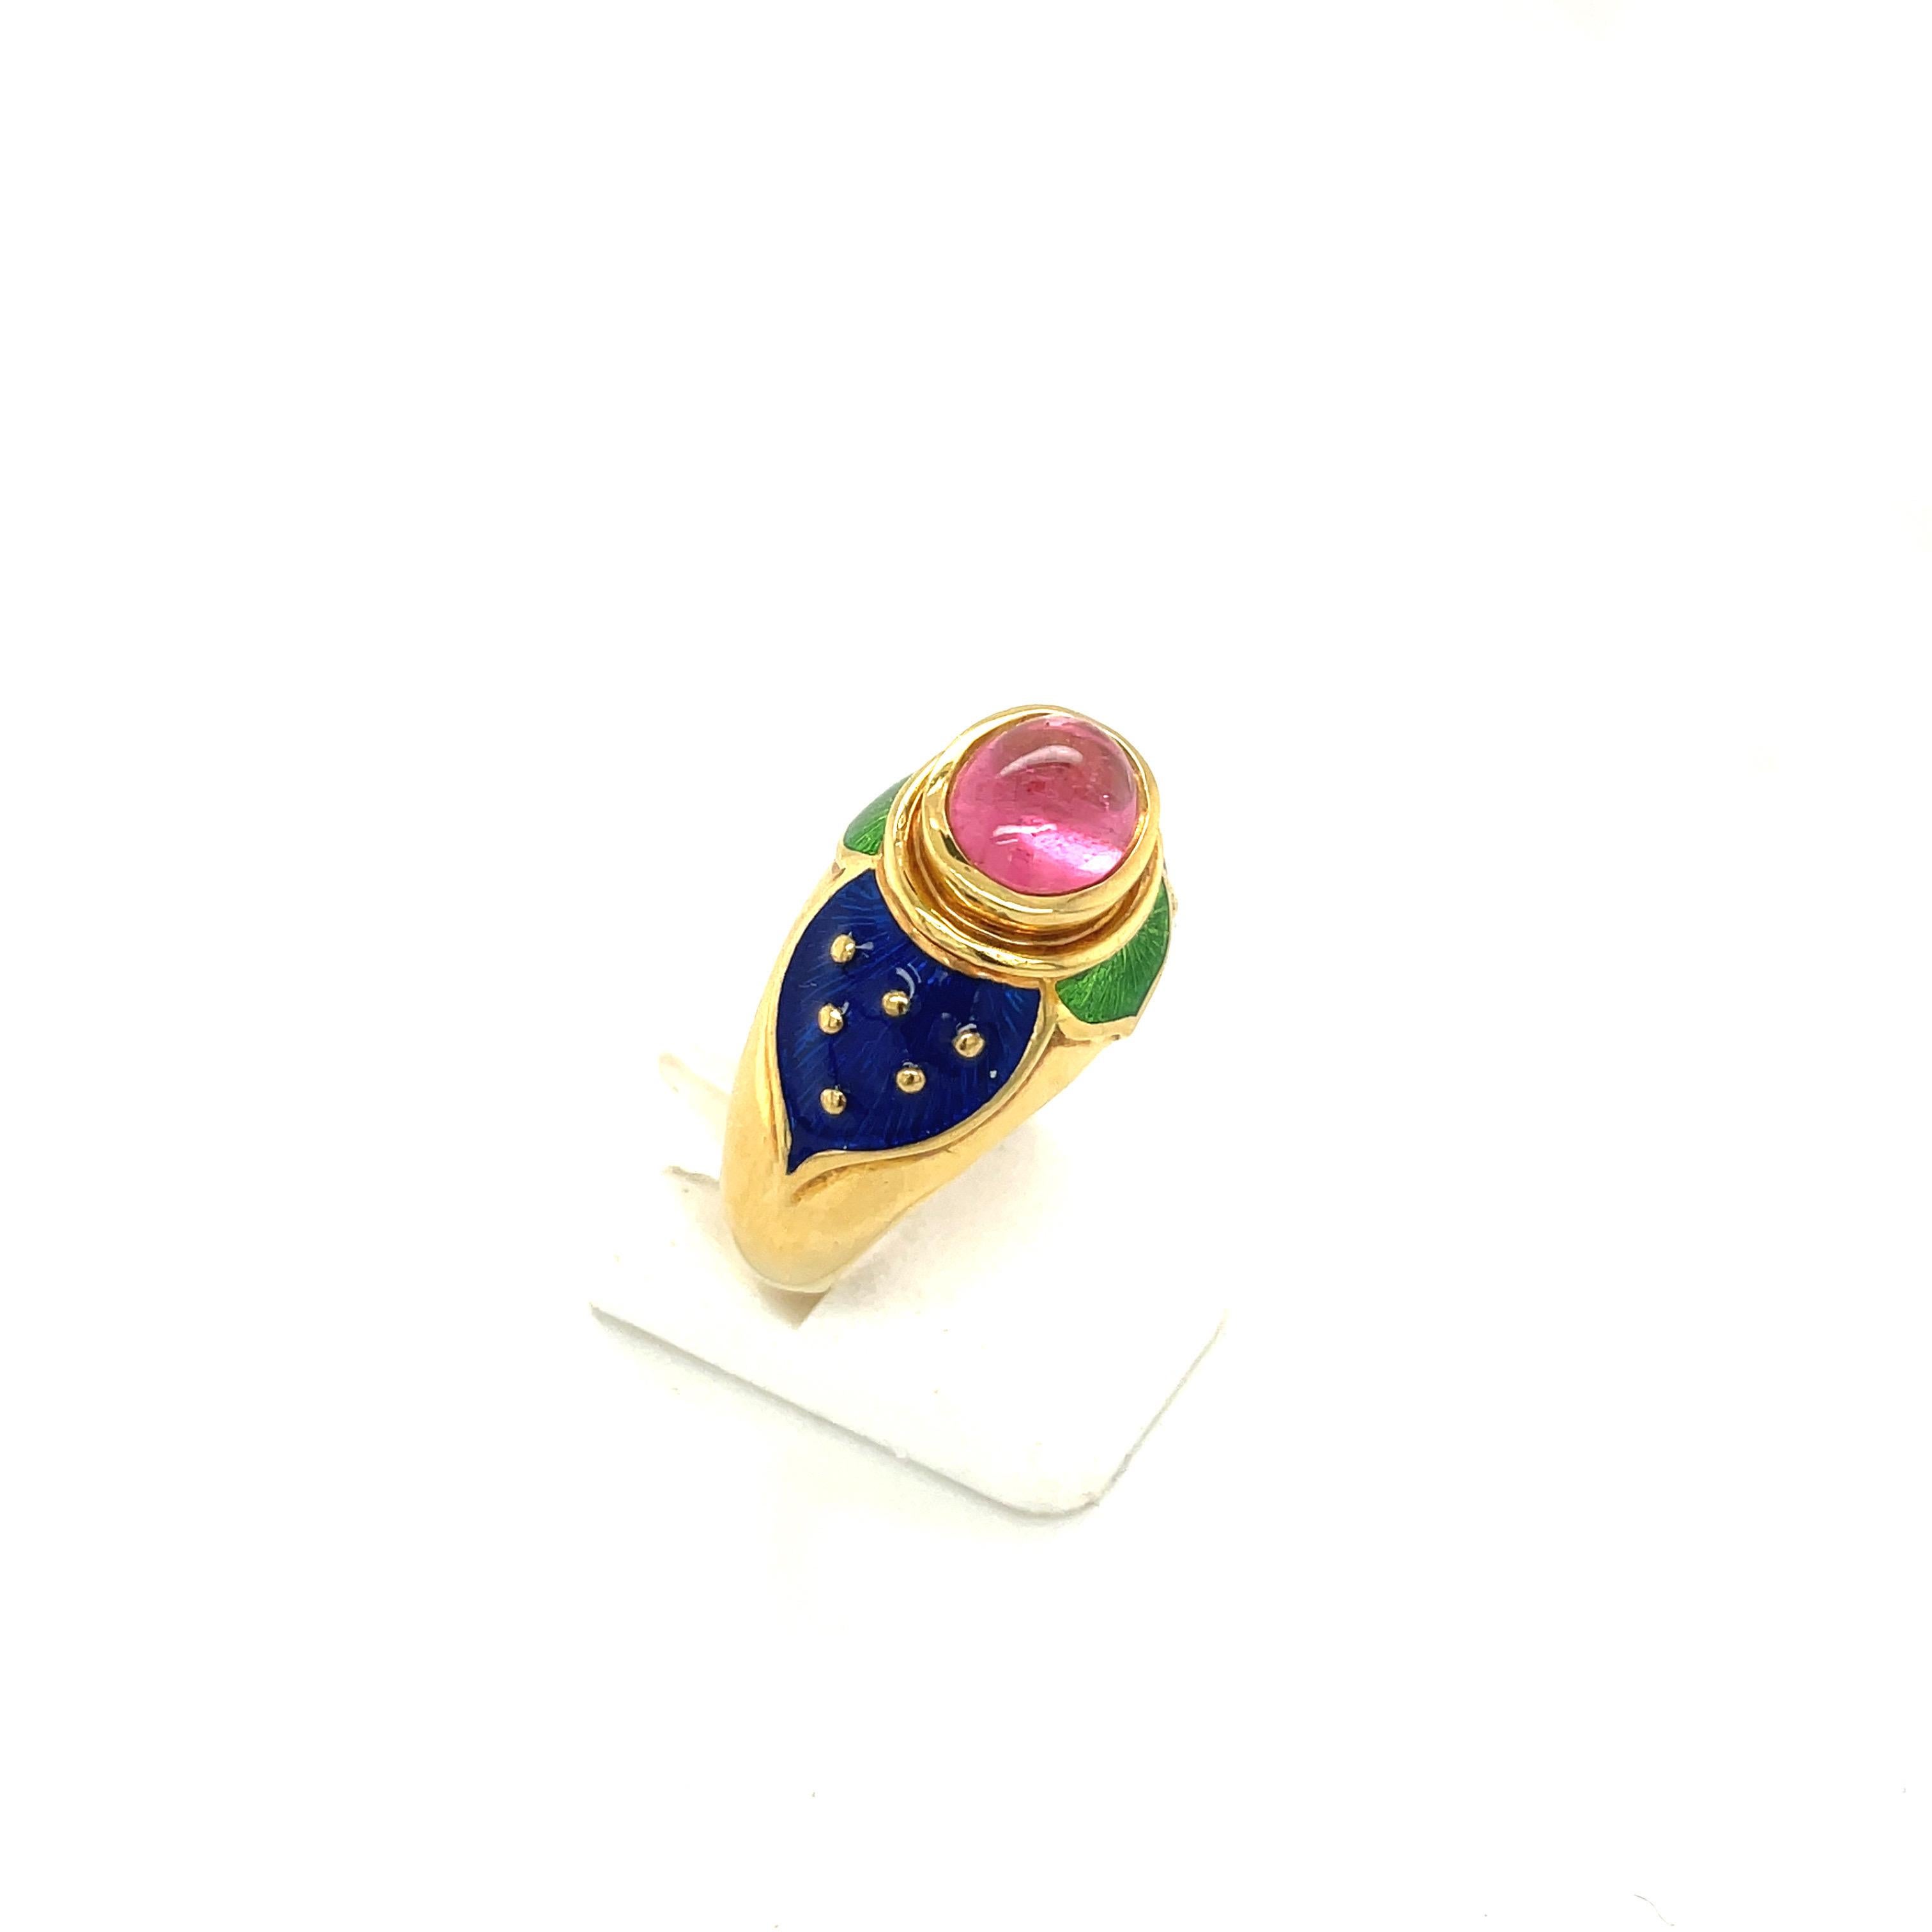 Women's or Men's Cellini 18KT YG Ring with Cabochon Pink Tourmaline Center & Blue & Green Enamel For Sale